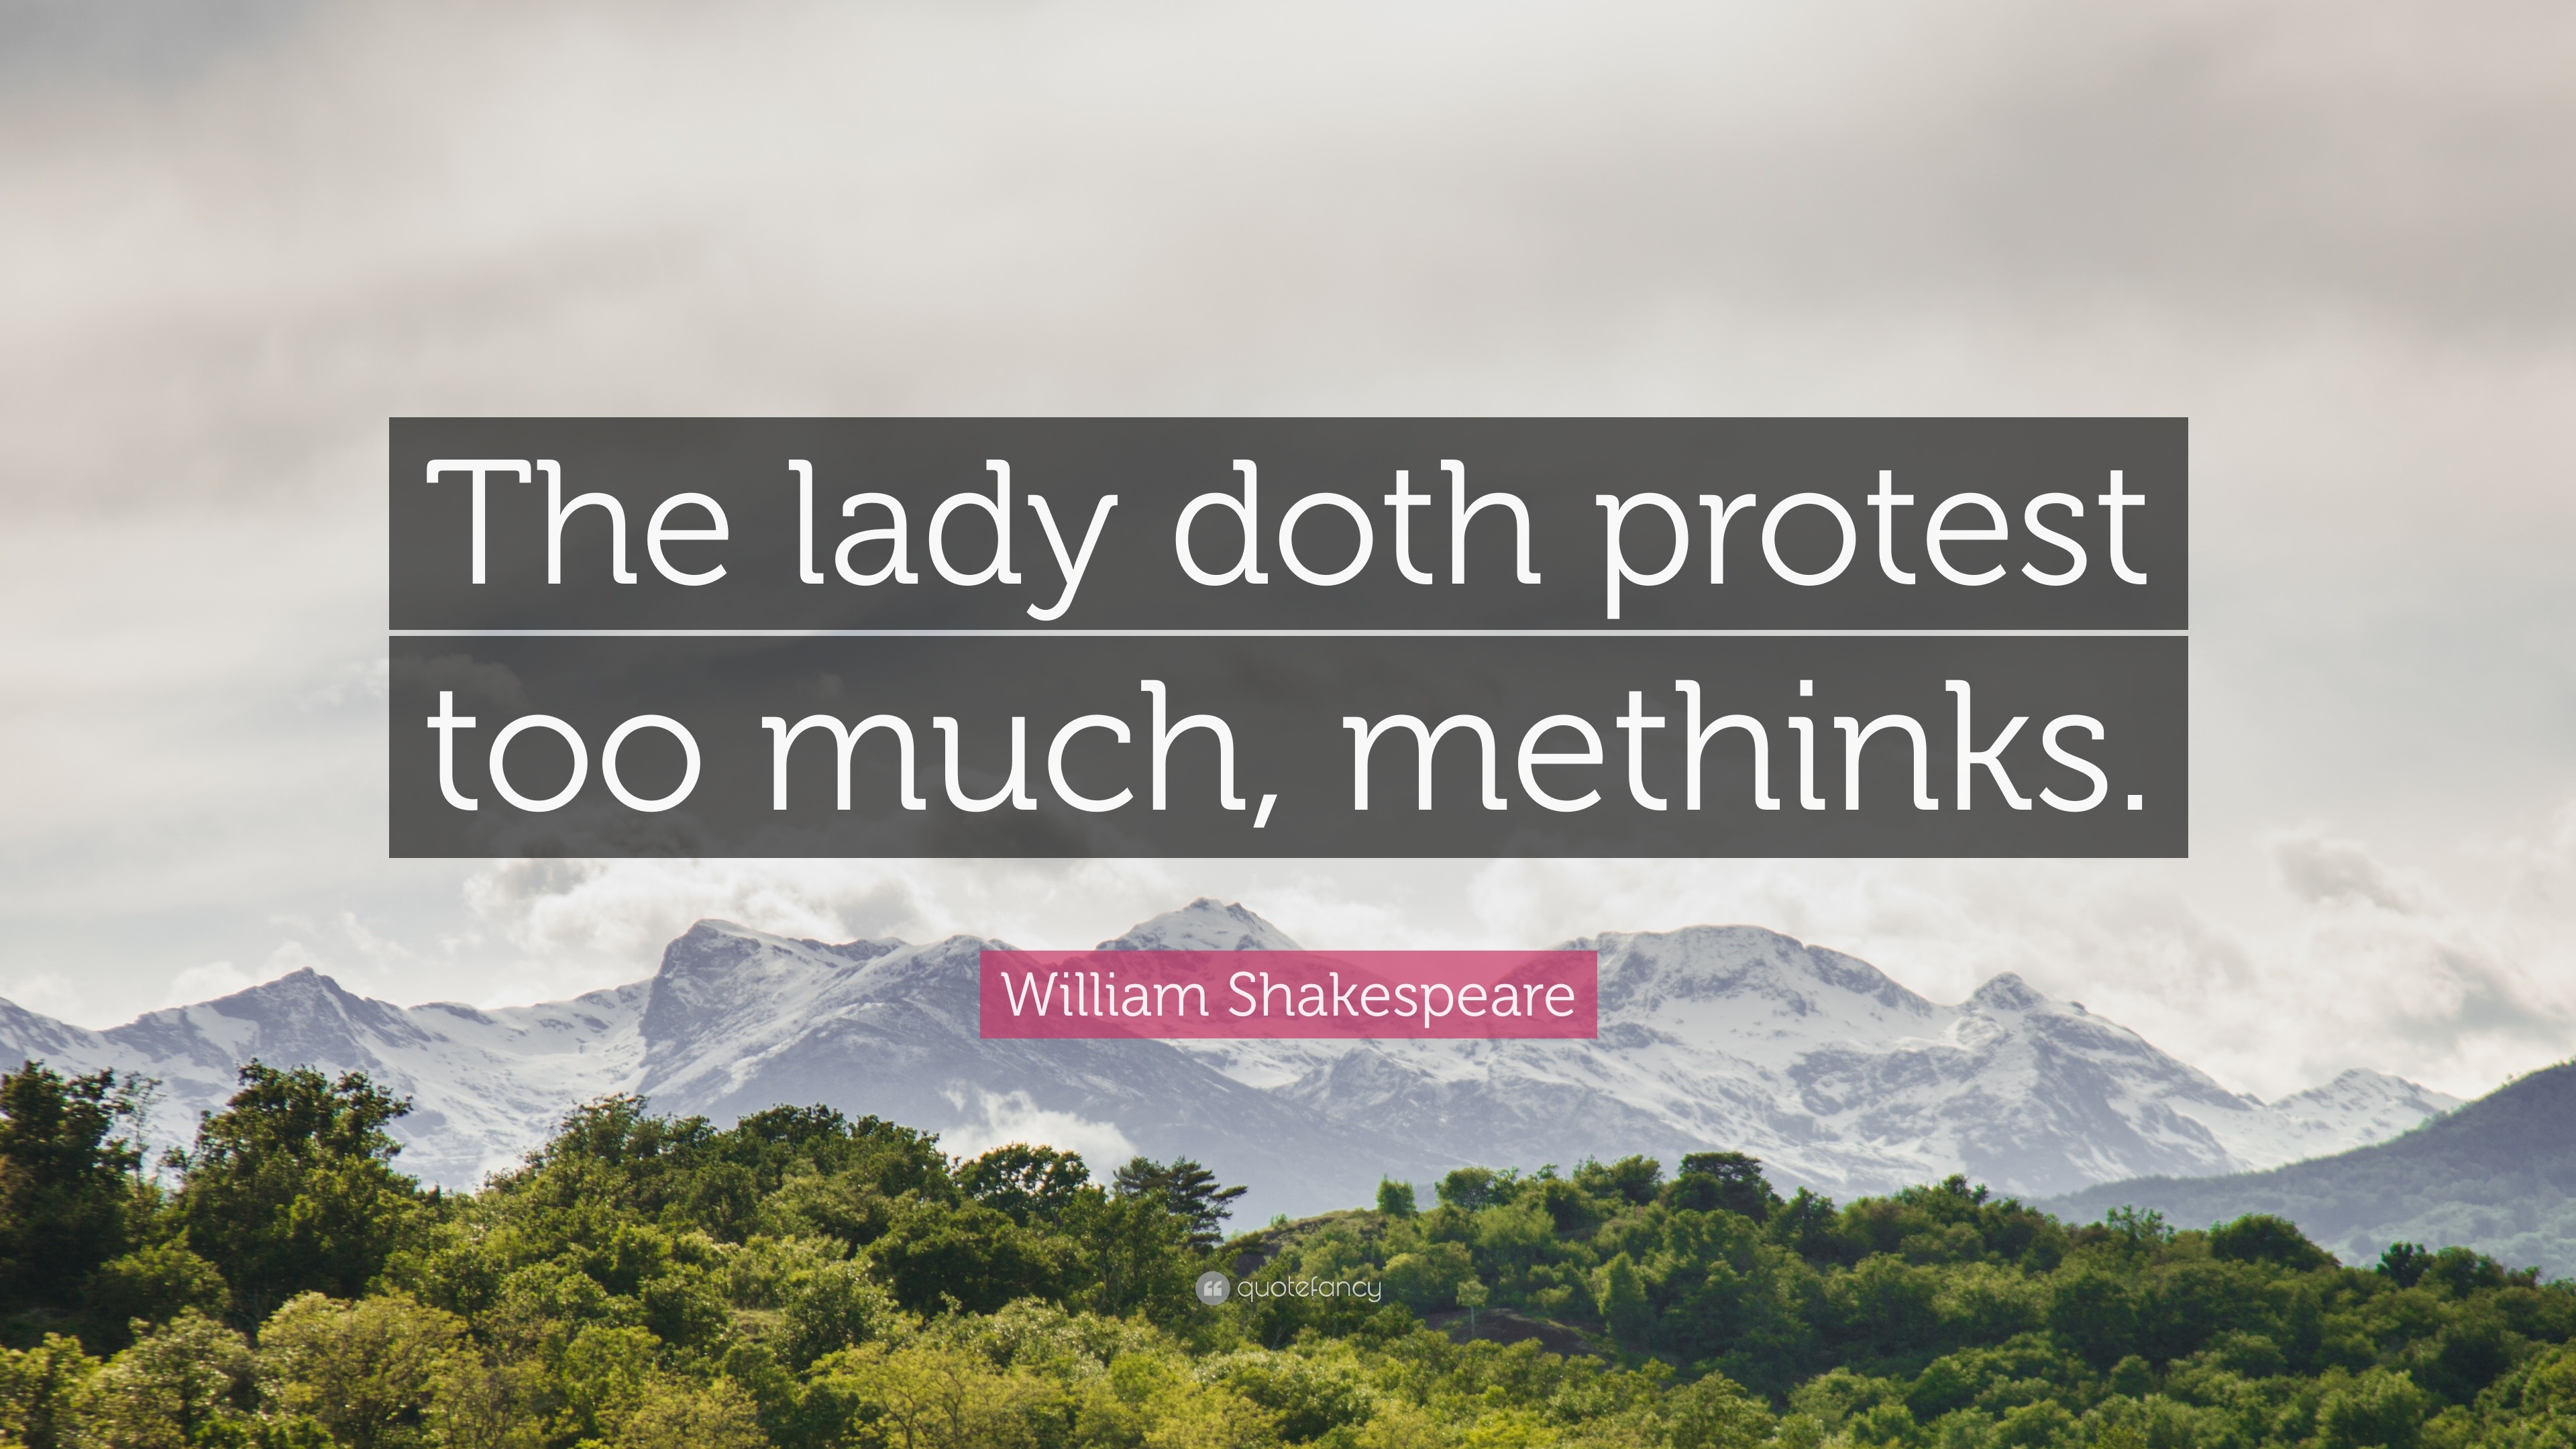 William Shakespeare Quote: “The lady doth protest too much, methinks.” (12  wallpapers) - Quotefancy